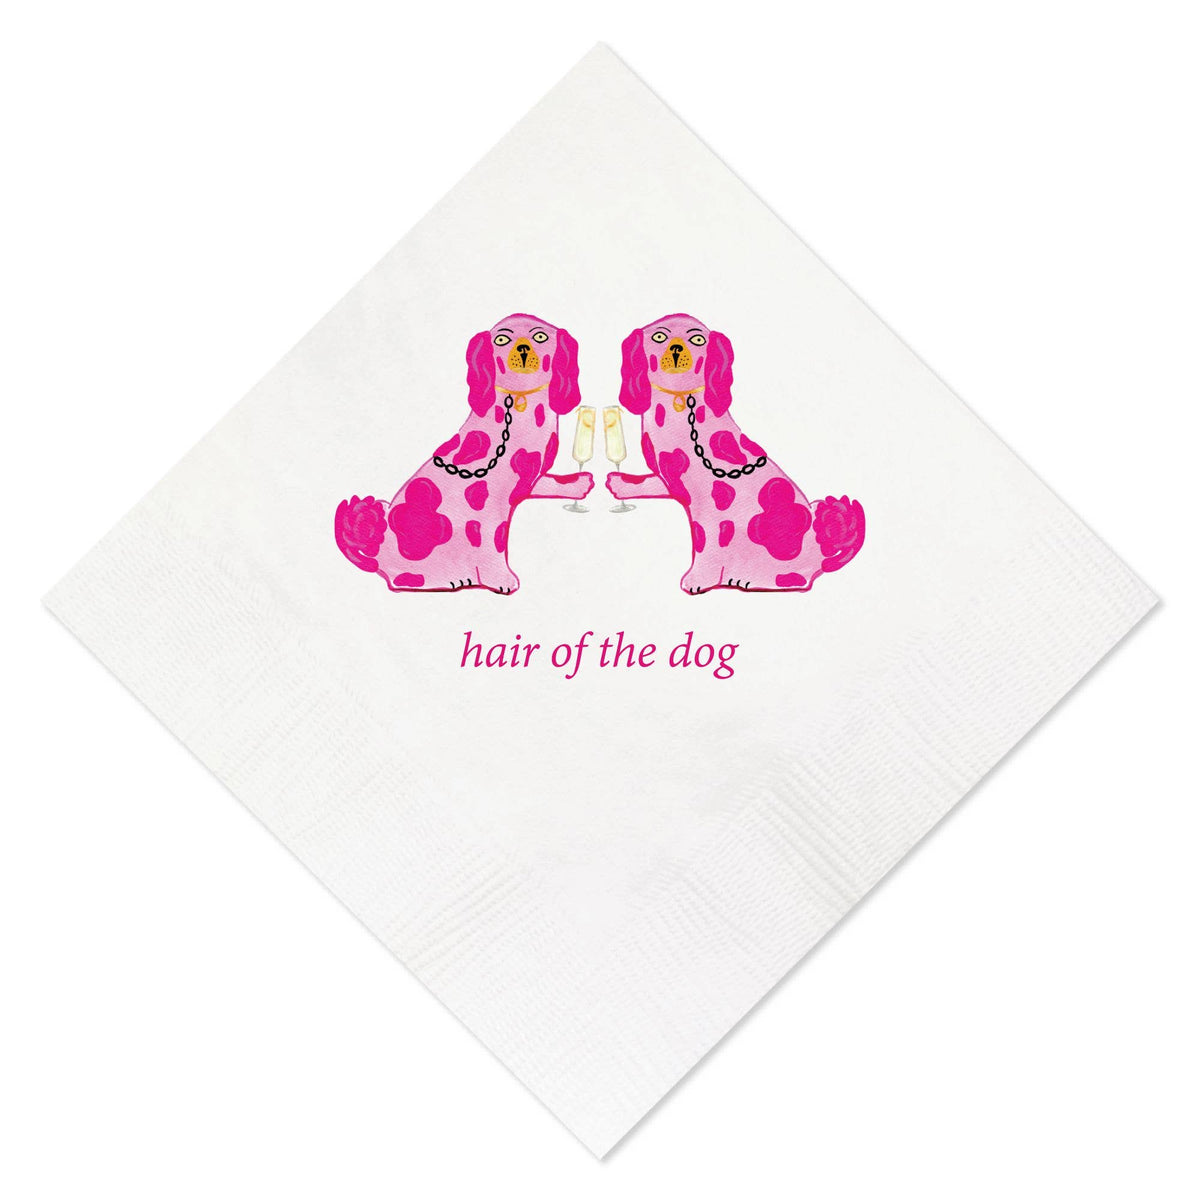 Hair Of The Dog Napkins - The Preppy Bunny